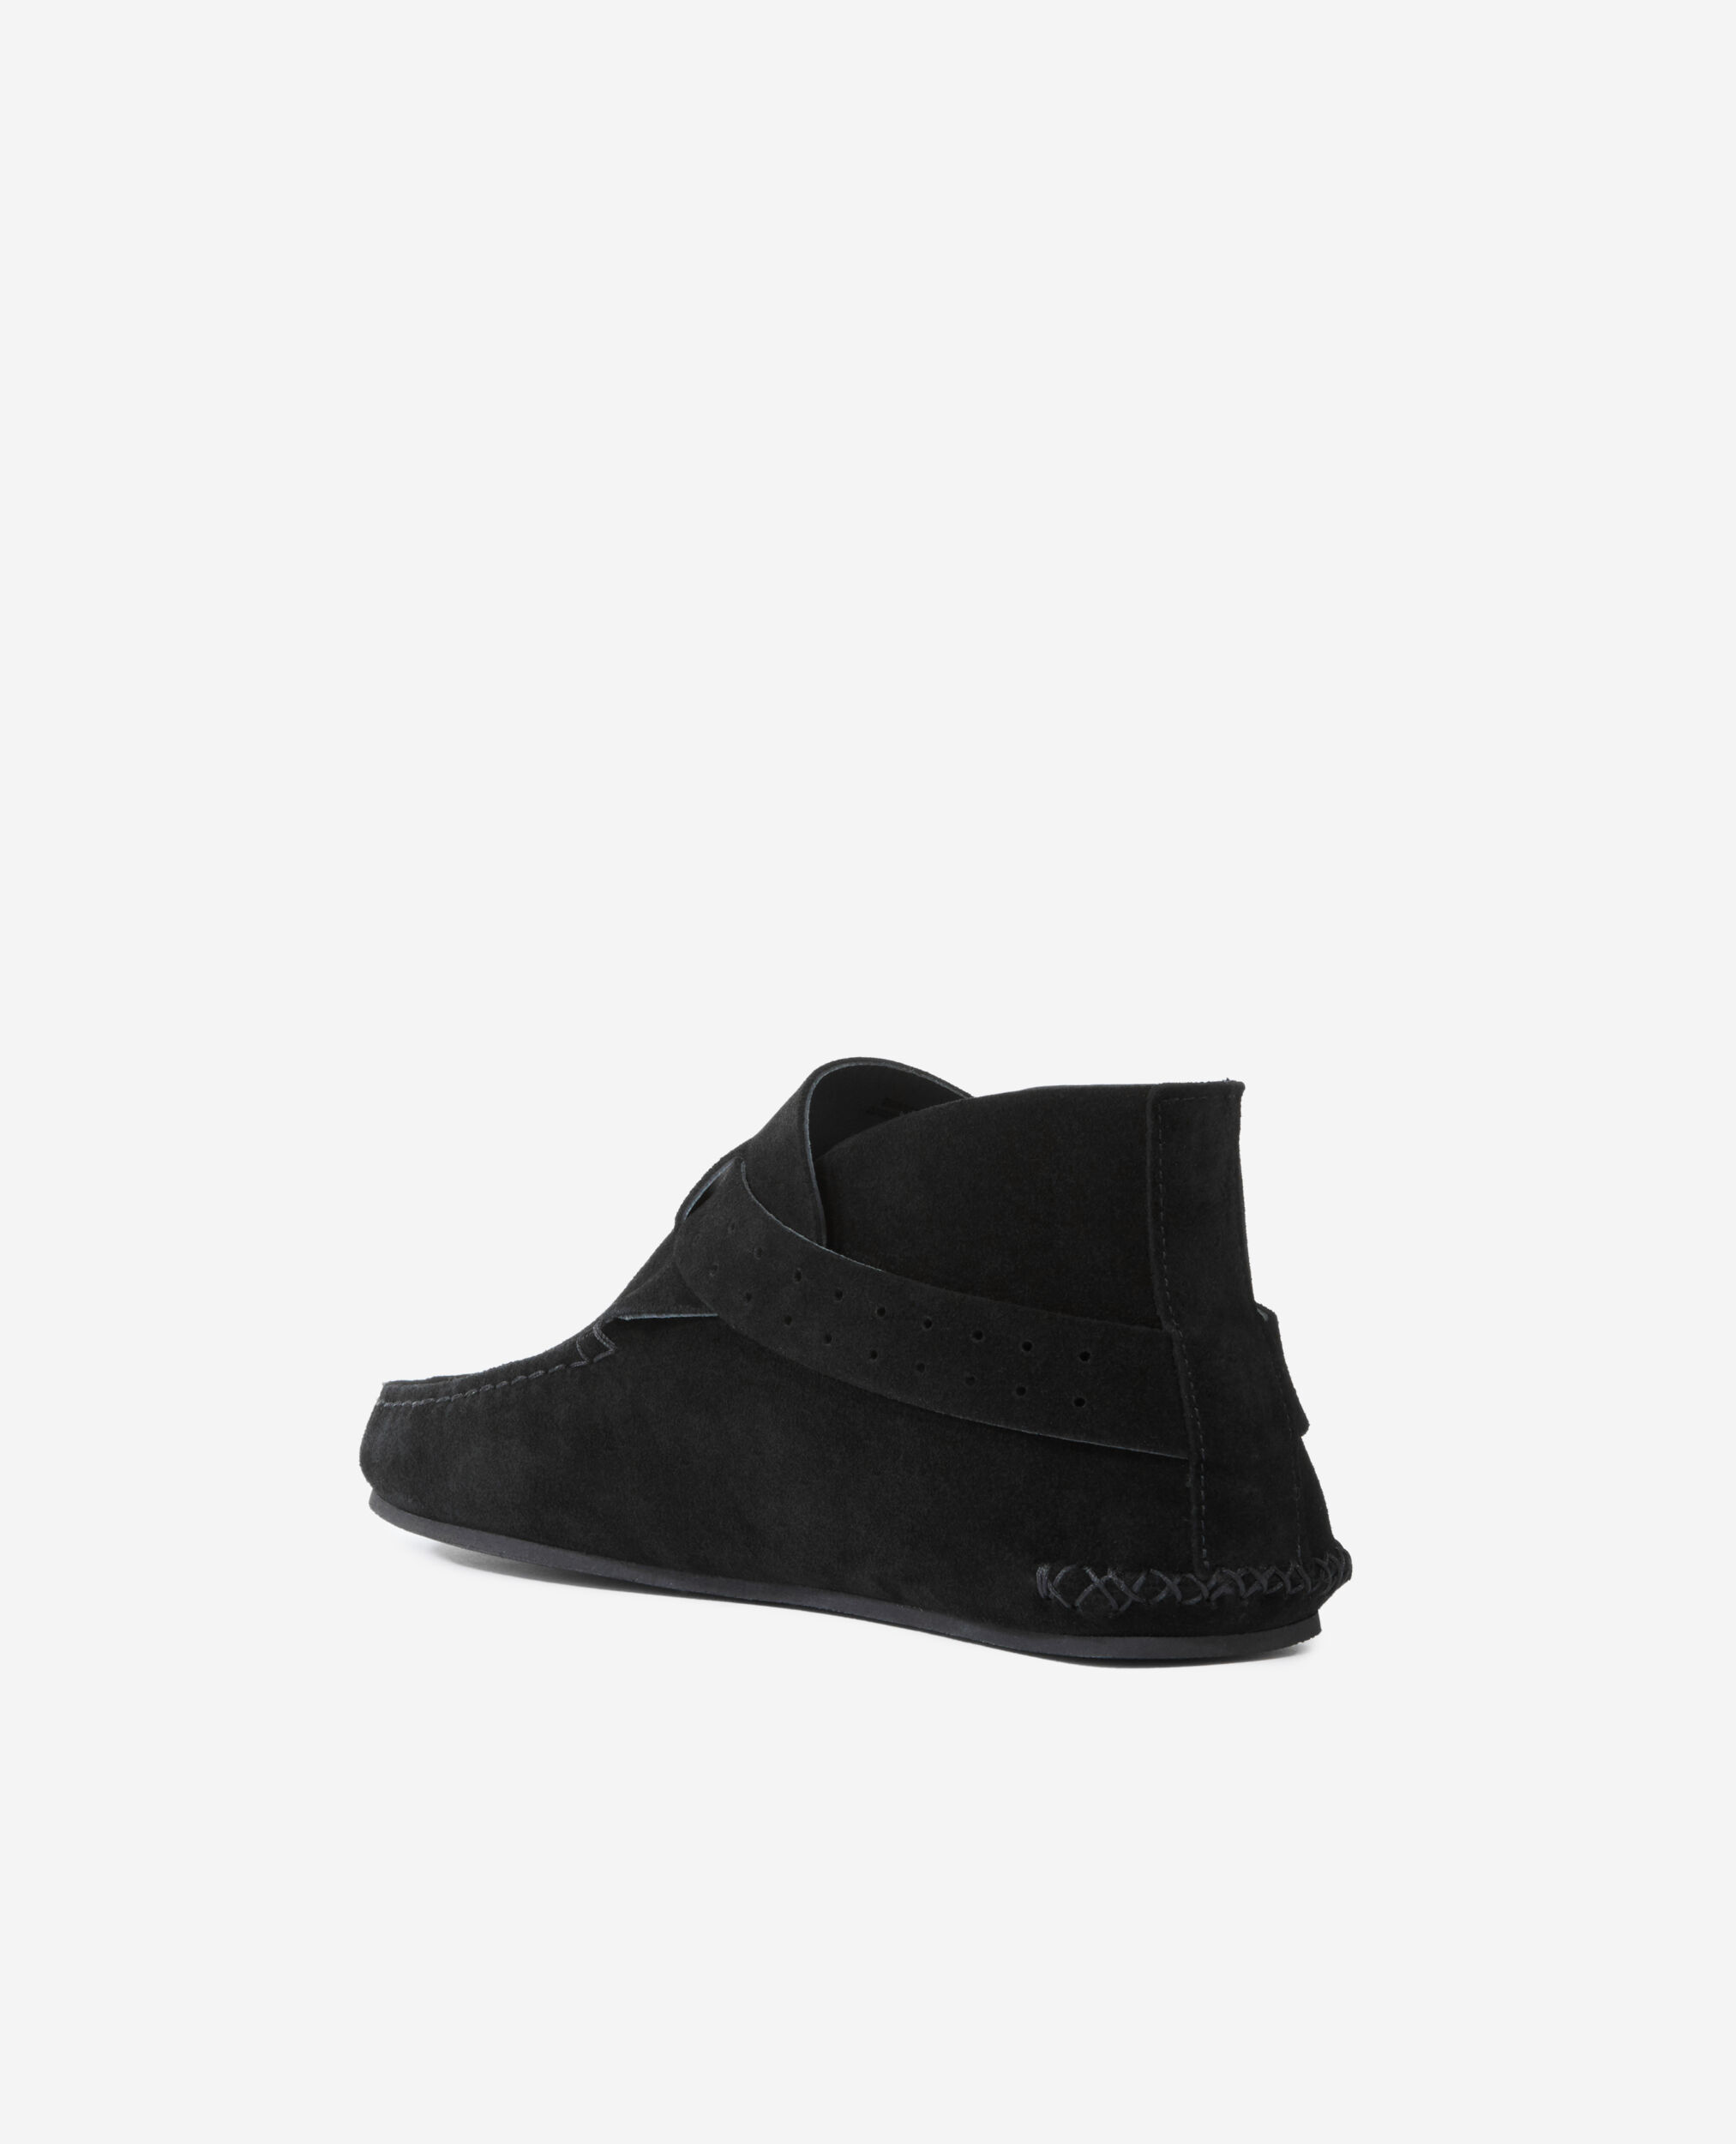 Black suede leather shoes | The Kooples - US